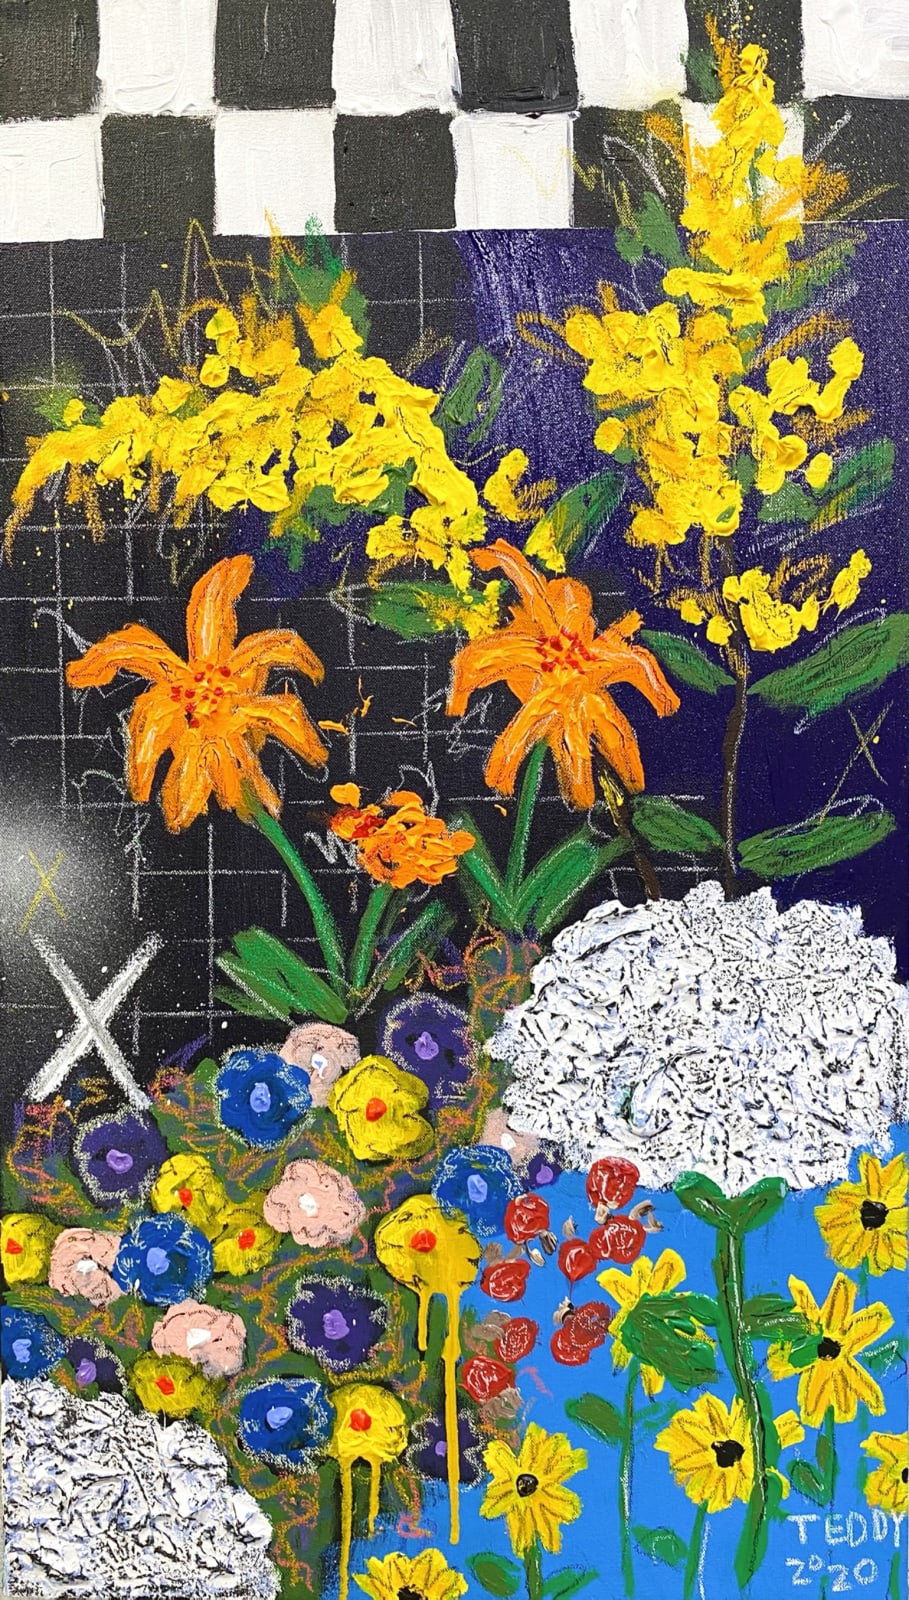 Teddy Benfield, Untitled (Summer Flowers of Southern Maine 2), 2020